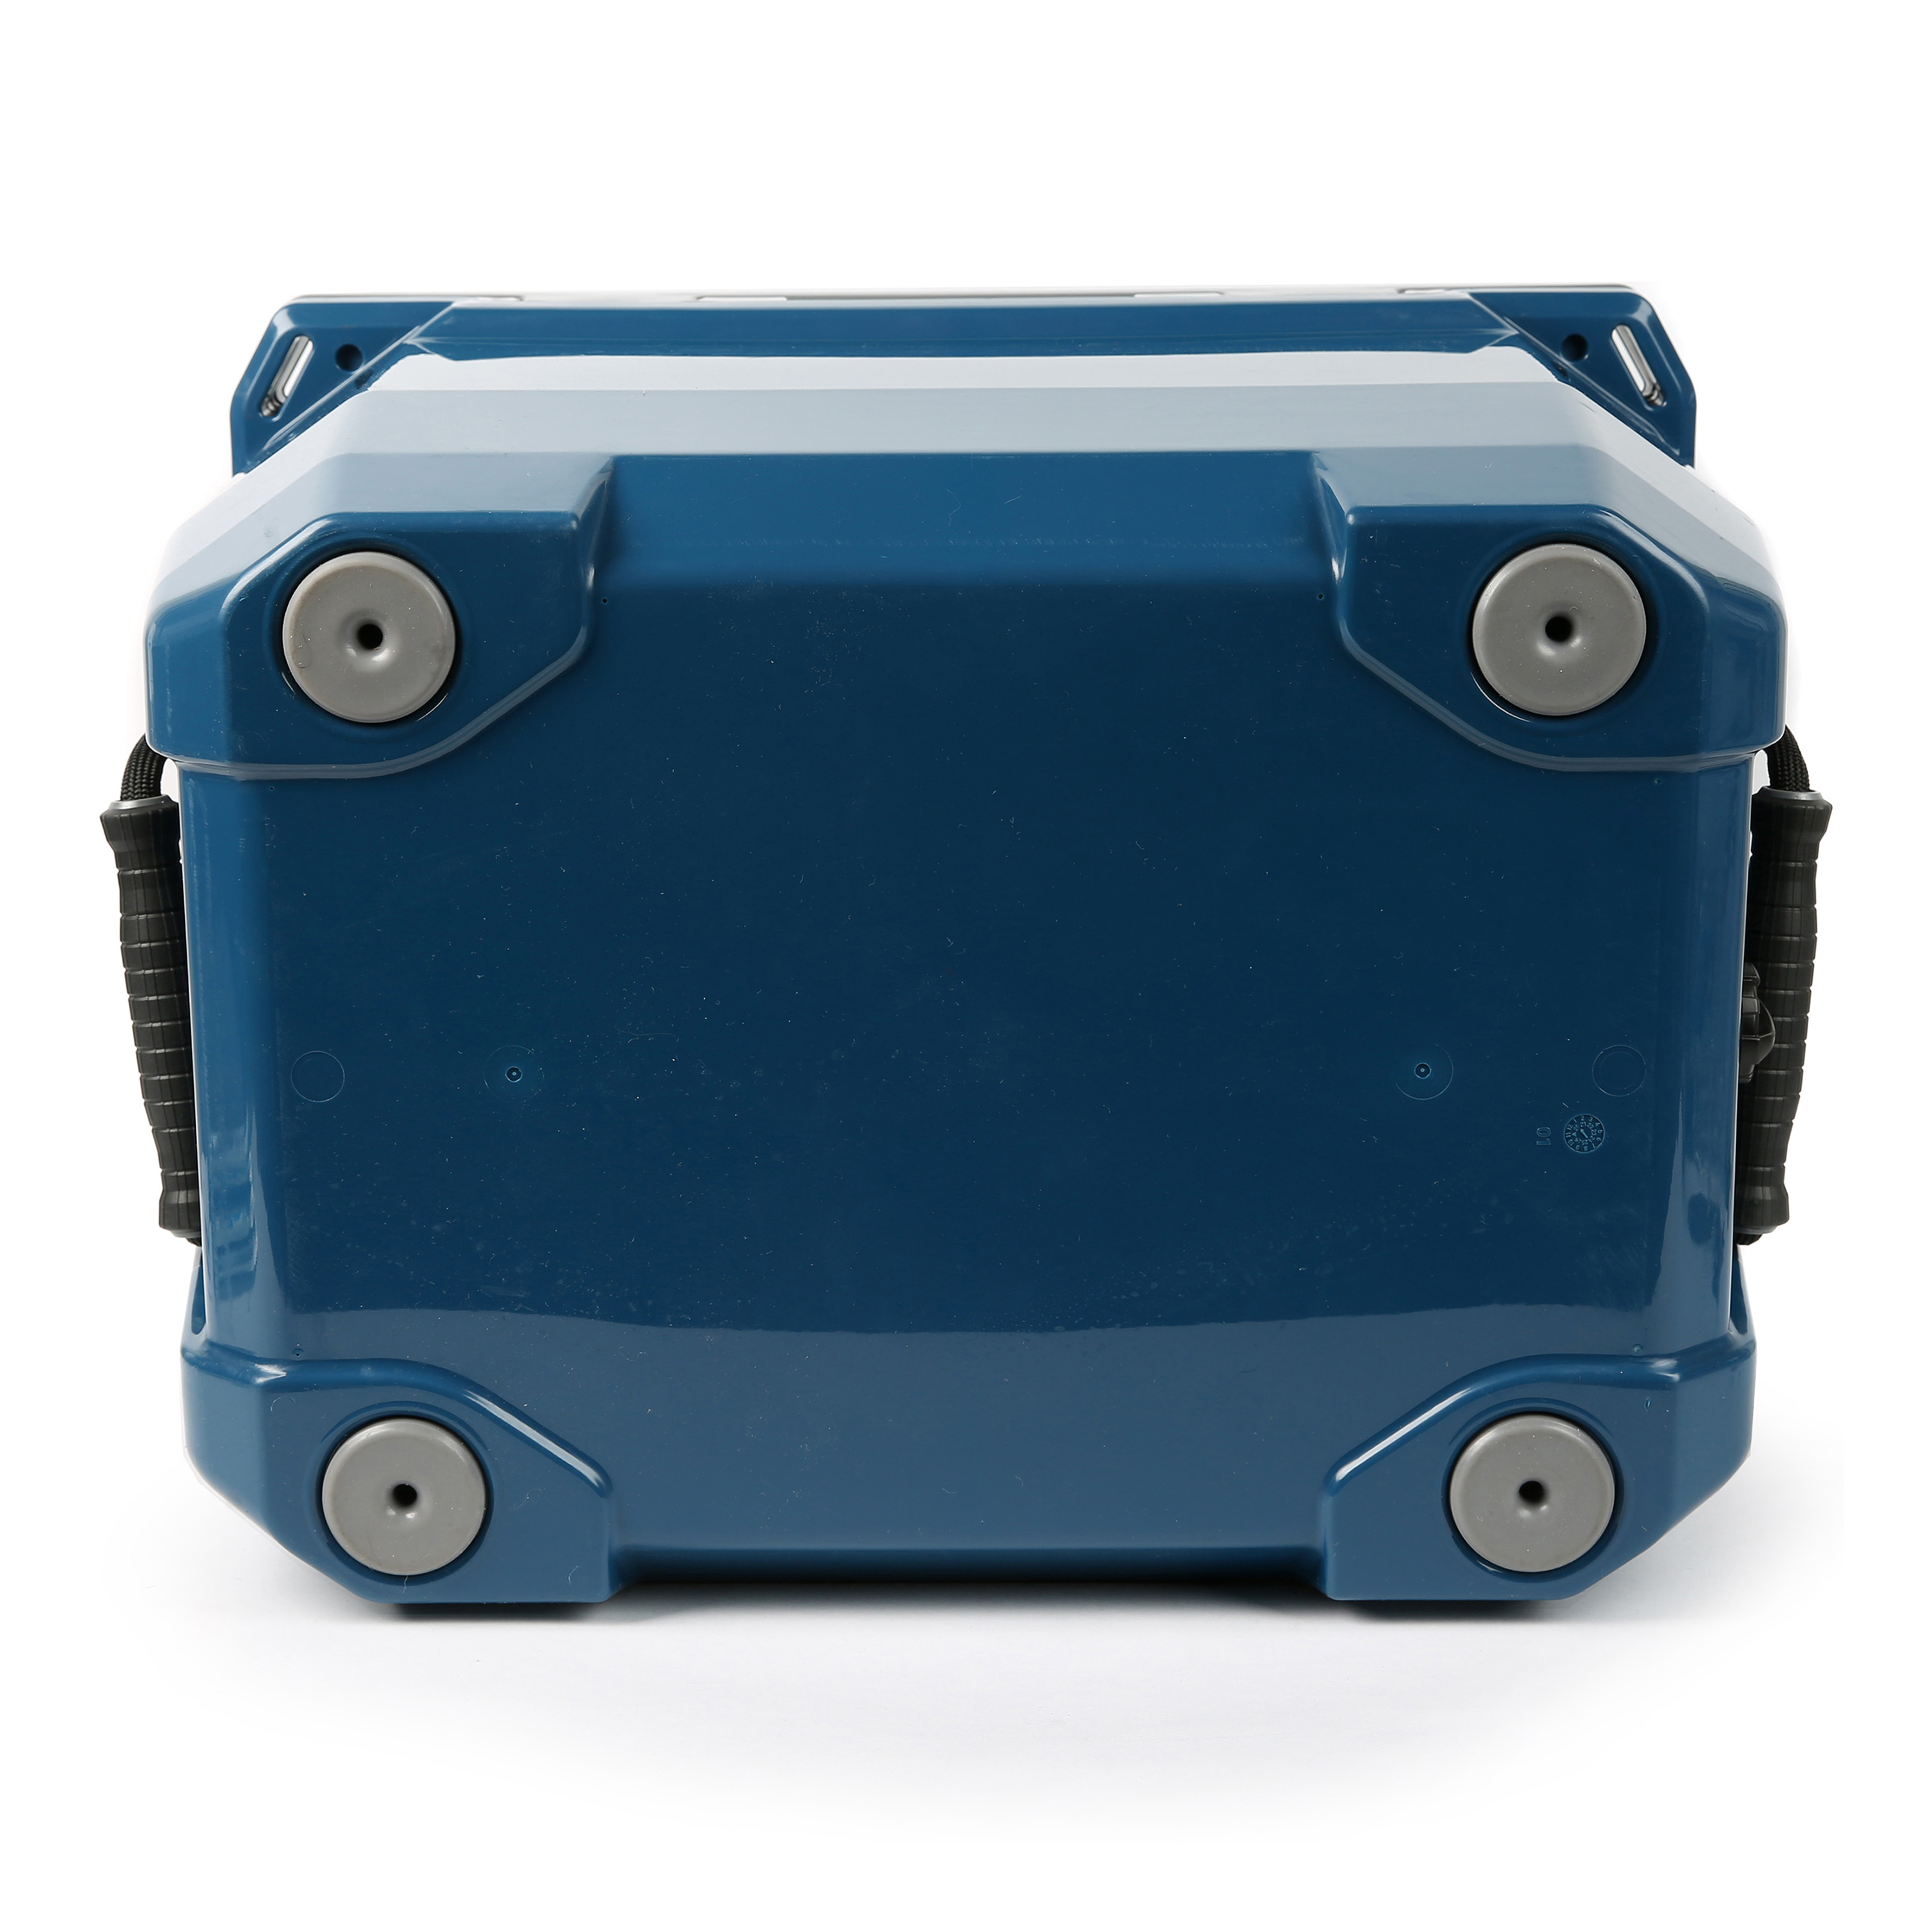 Ozark Trail 35 Quart Hard Sided Cooler with Microban Protection, Stainless Steel Locking Plate, Blue - image 5 of 14